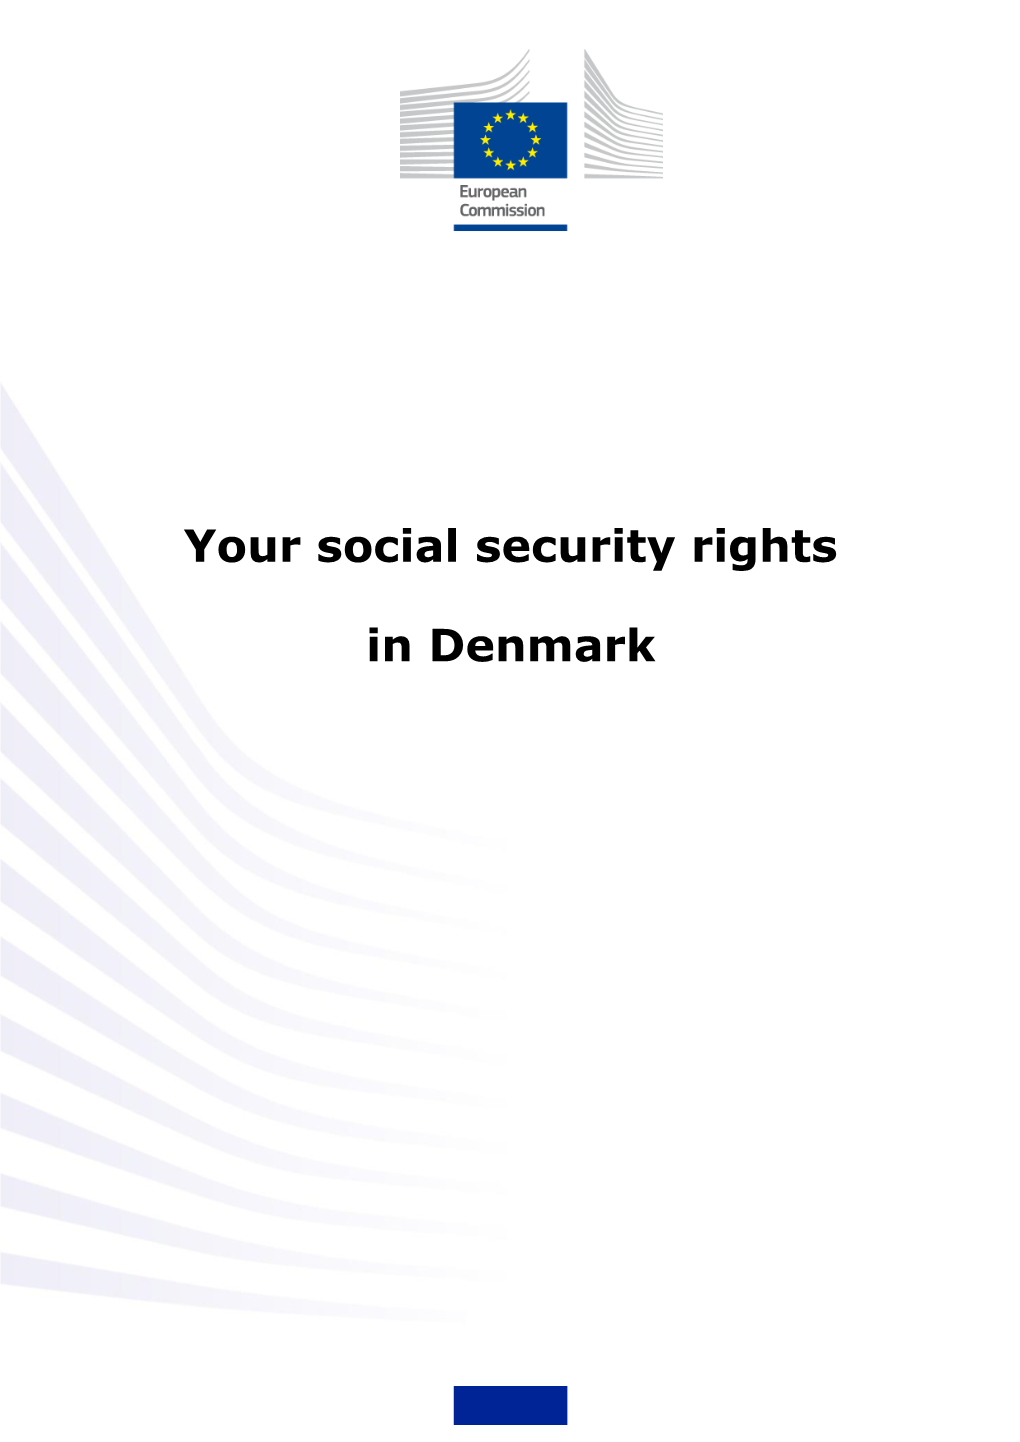 Your Social Security Rights in Denmark